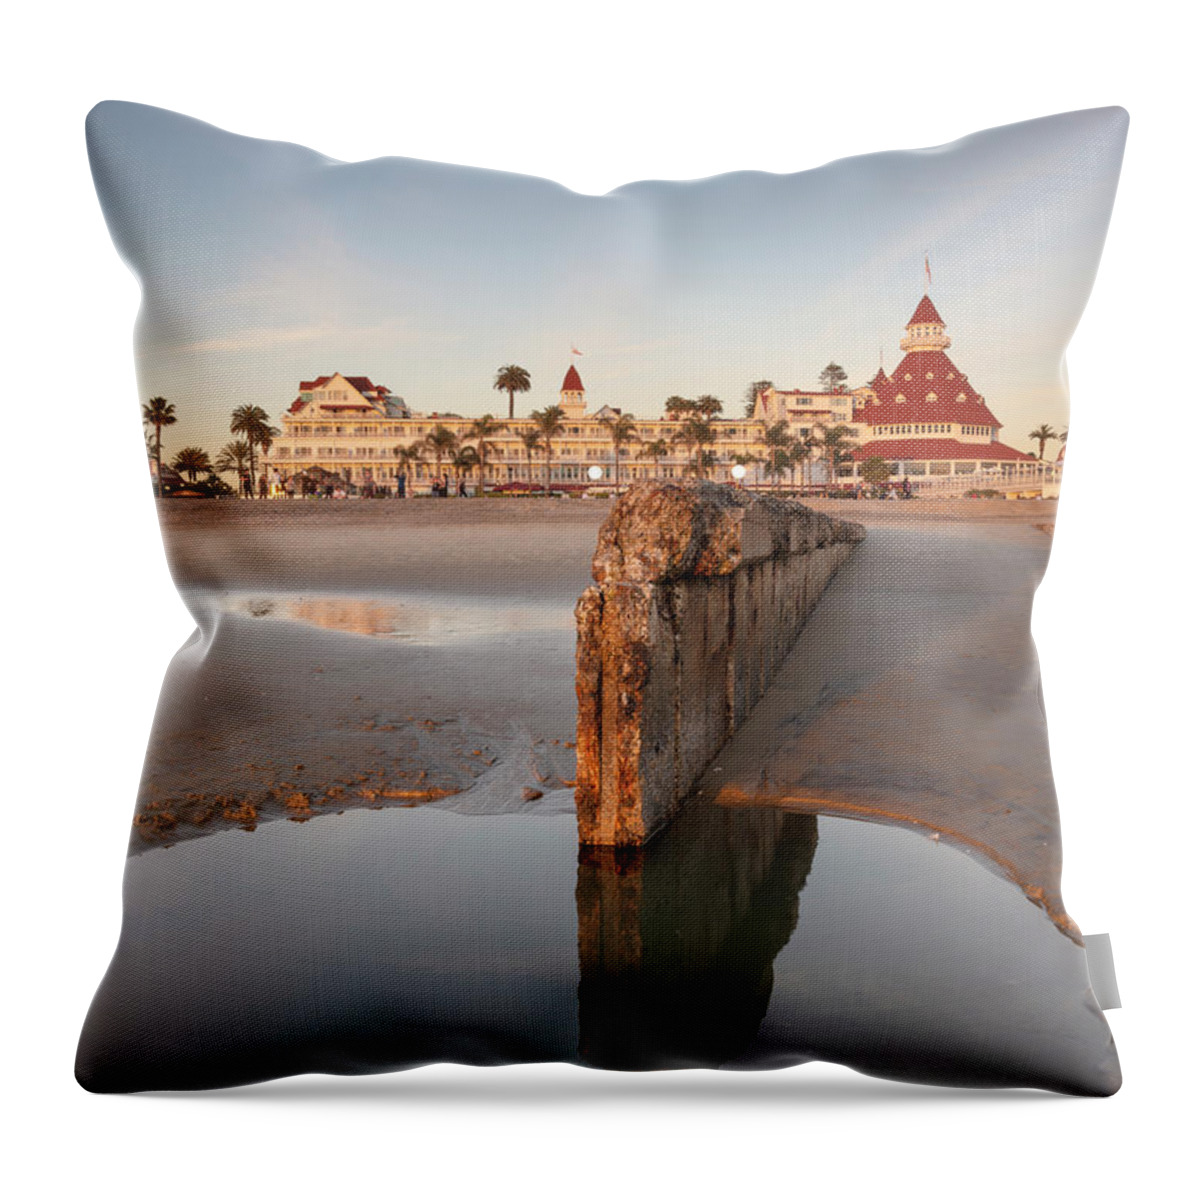 San Diego Throw Pillow featuring the photograph Hotel Del Coronado Reflection by William Dunigan